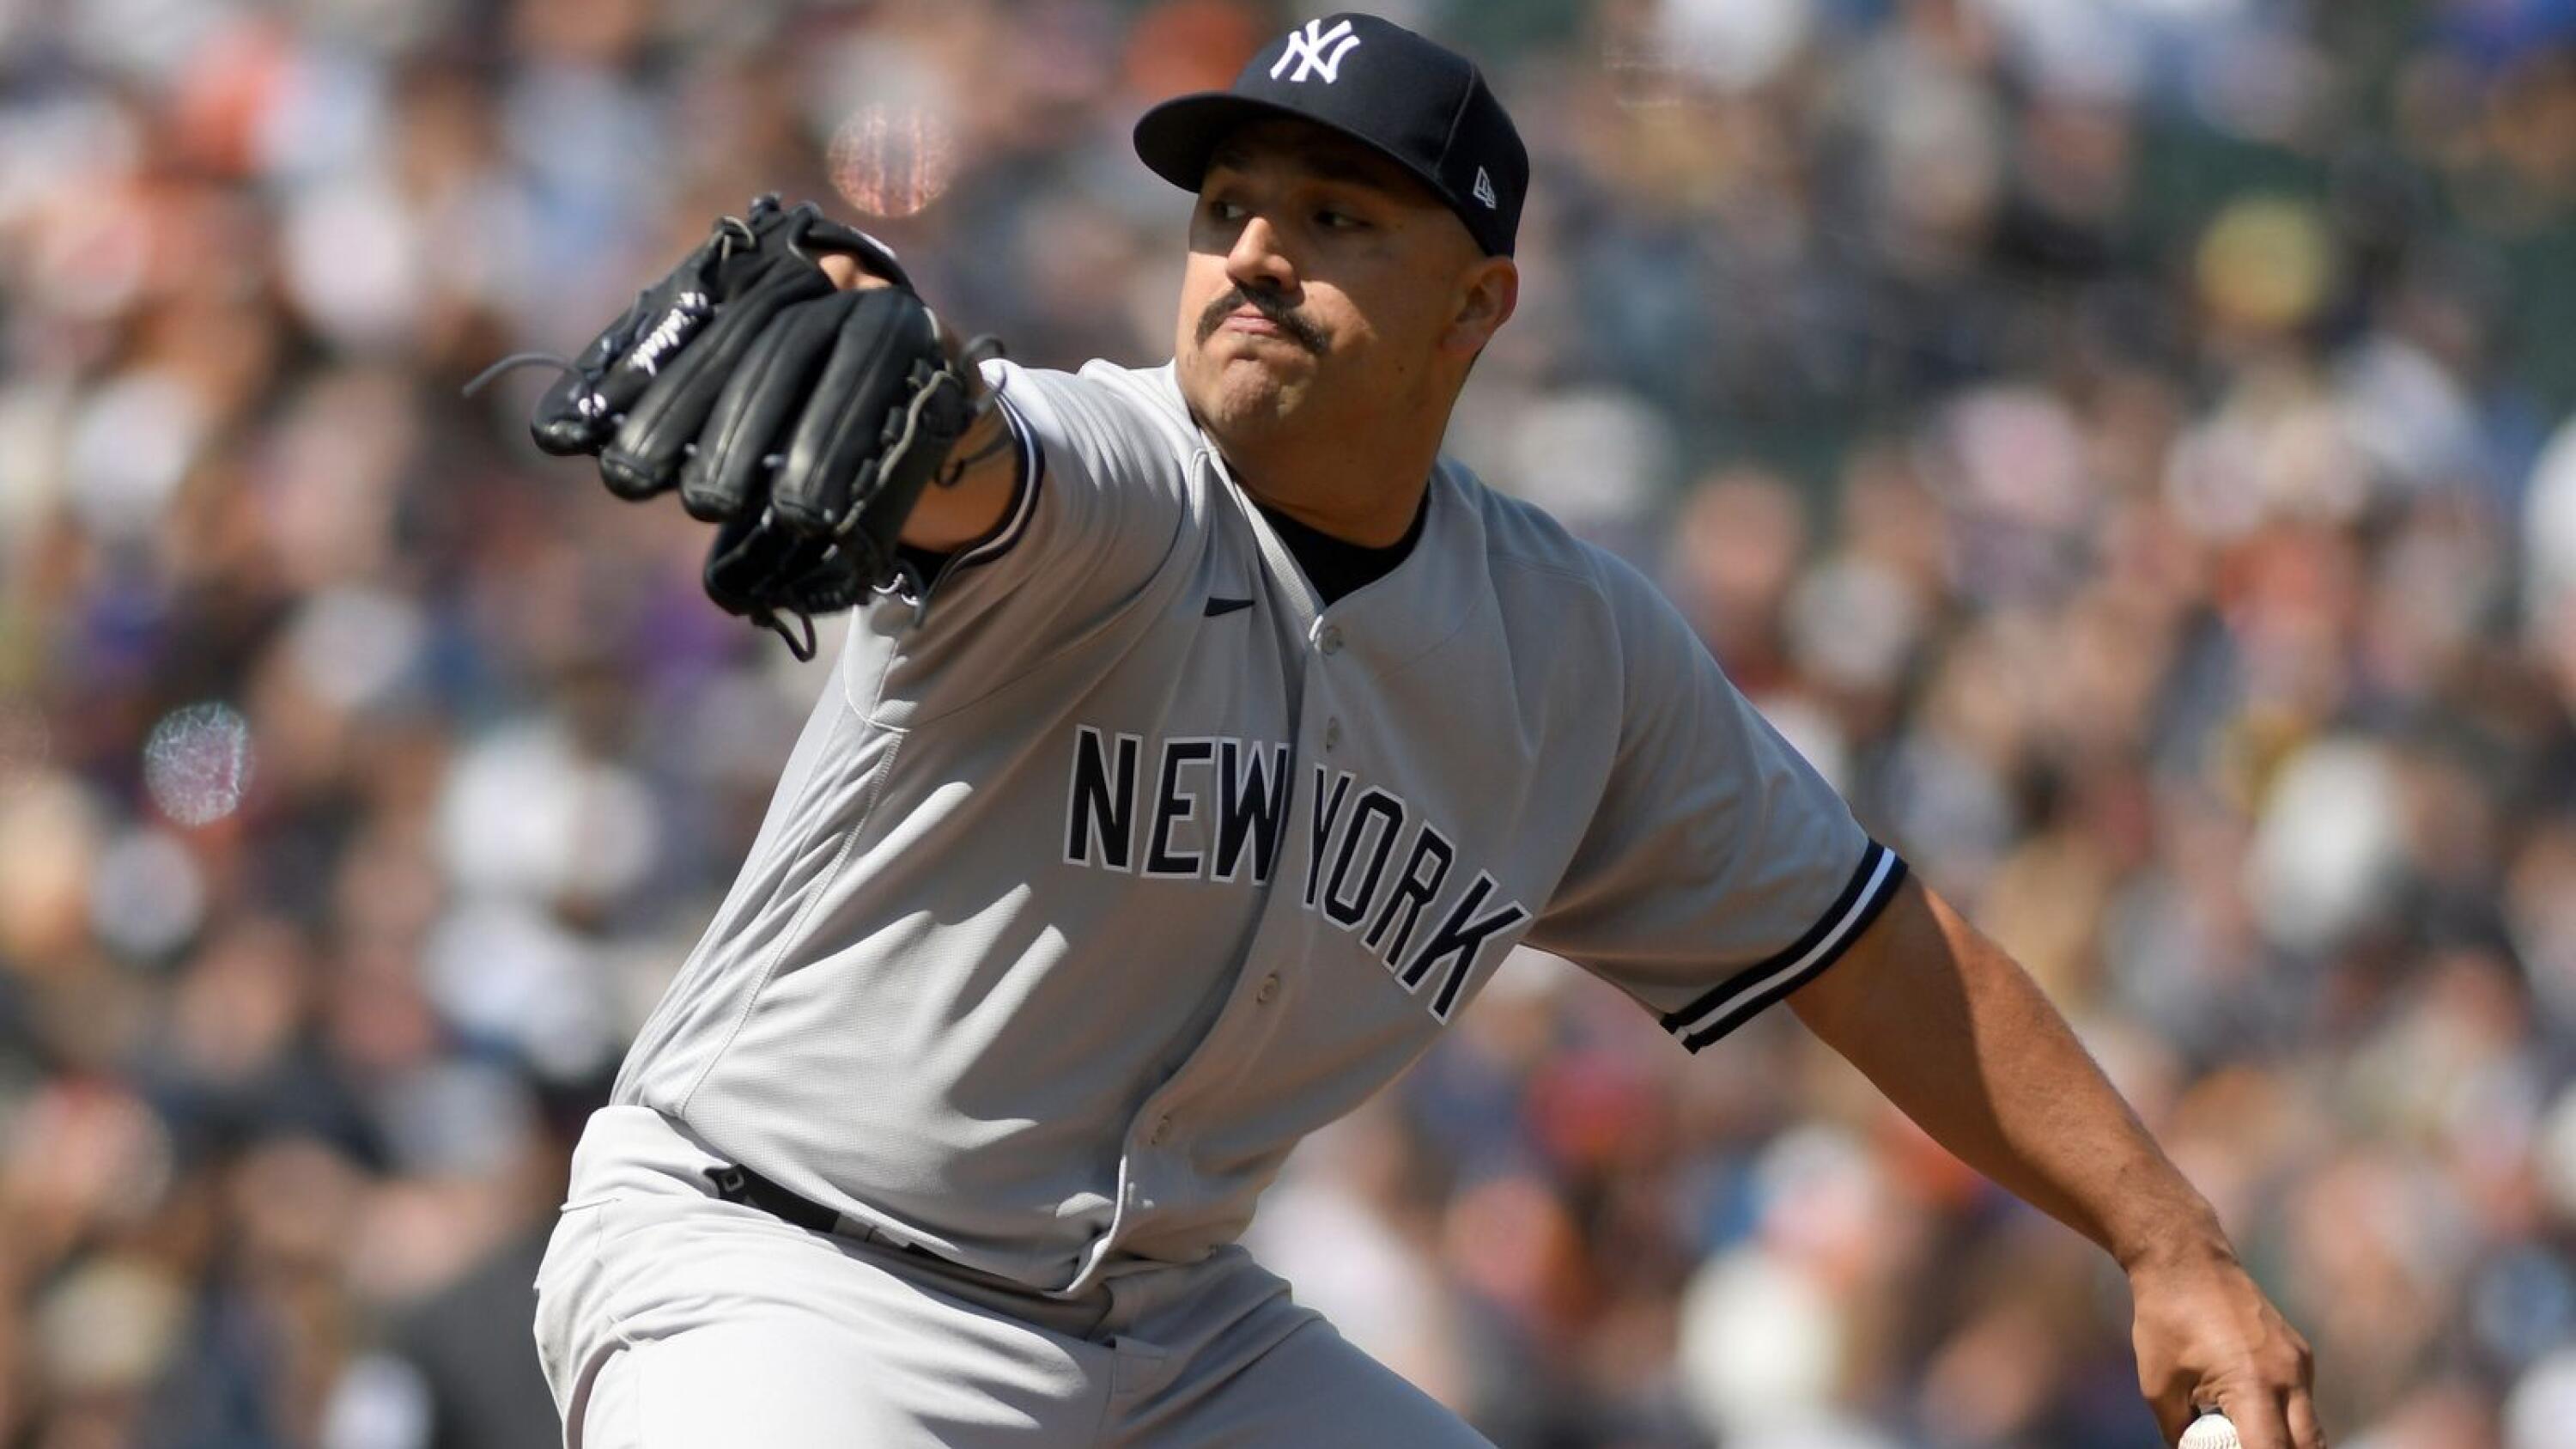 Yankees' starting pitcher Nestor Cortes back on the injured list with